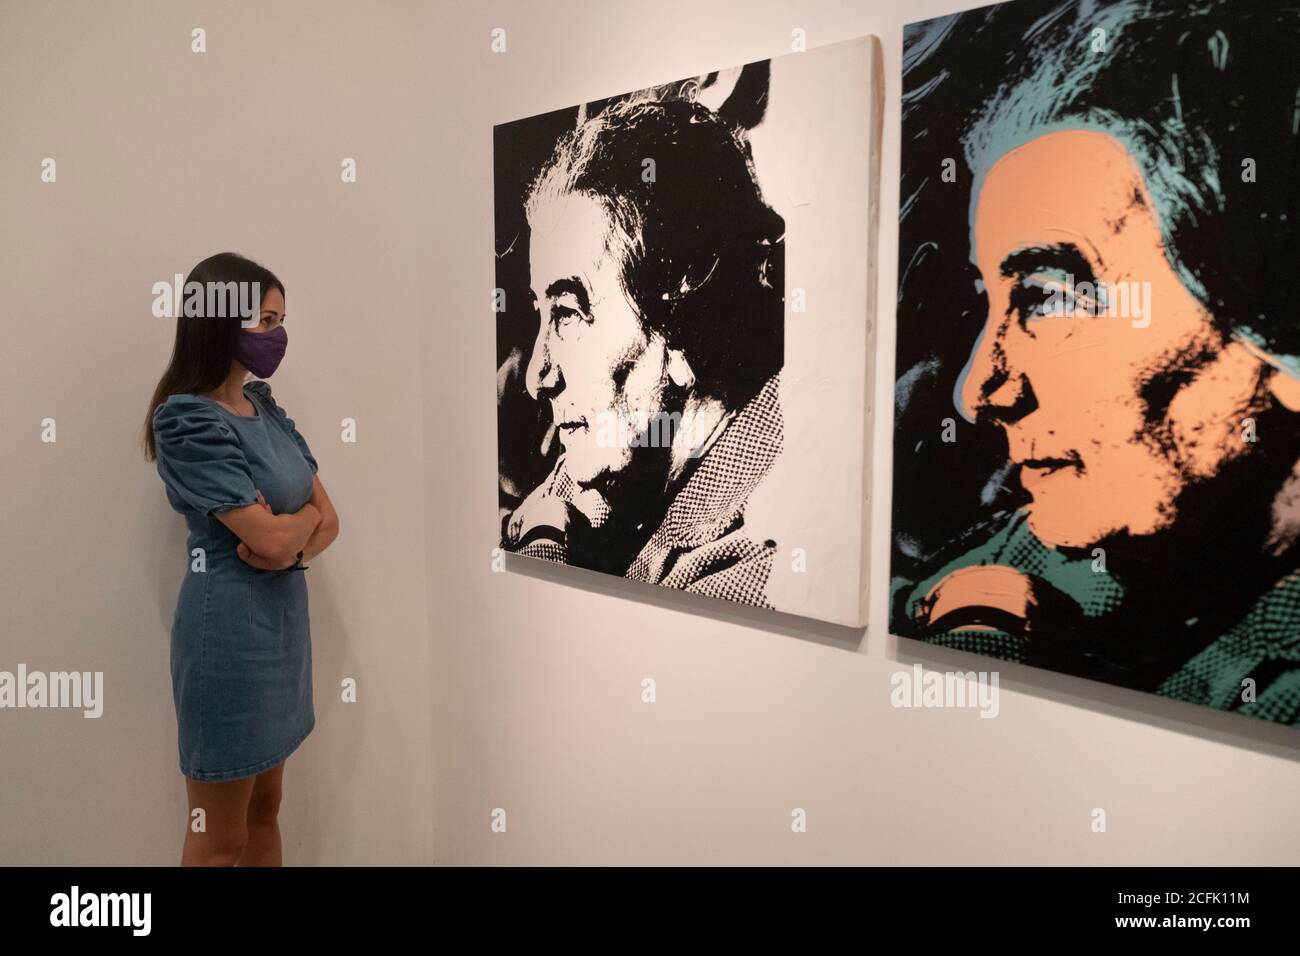 A visitor wearing face mask due to the COVID-19 coronavirus pandemic views painting by Andy Warhol depicting the fourth Prime Minister of Israel Golda Meir displayed at the Modern Art Wing of the Israel Museum in West Jerusalem Israel Stock Photo